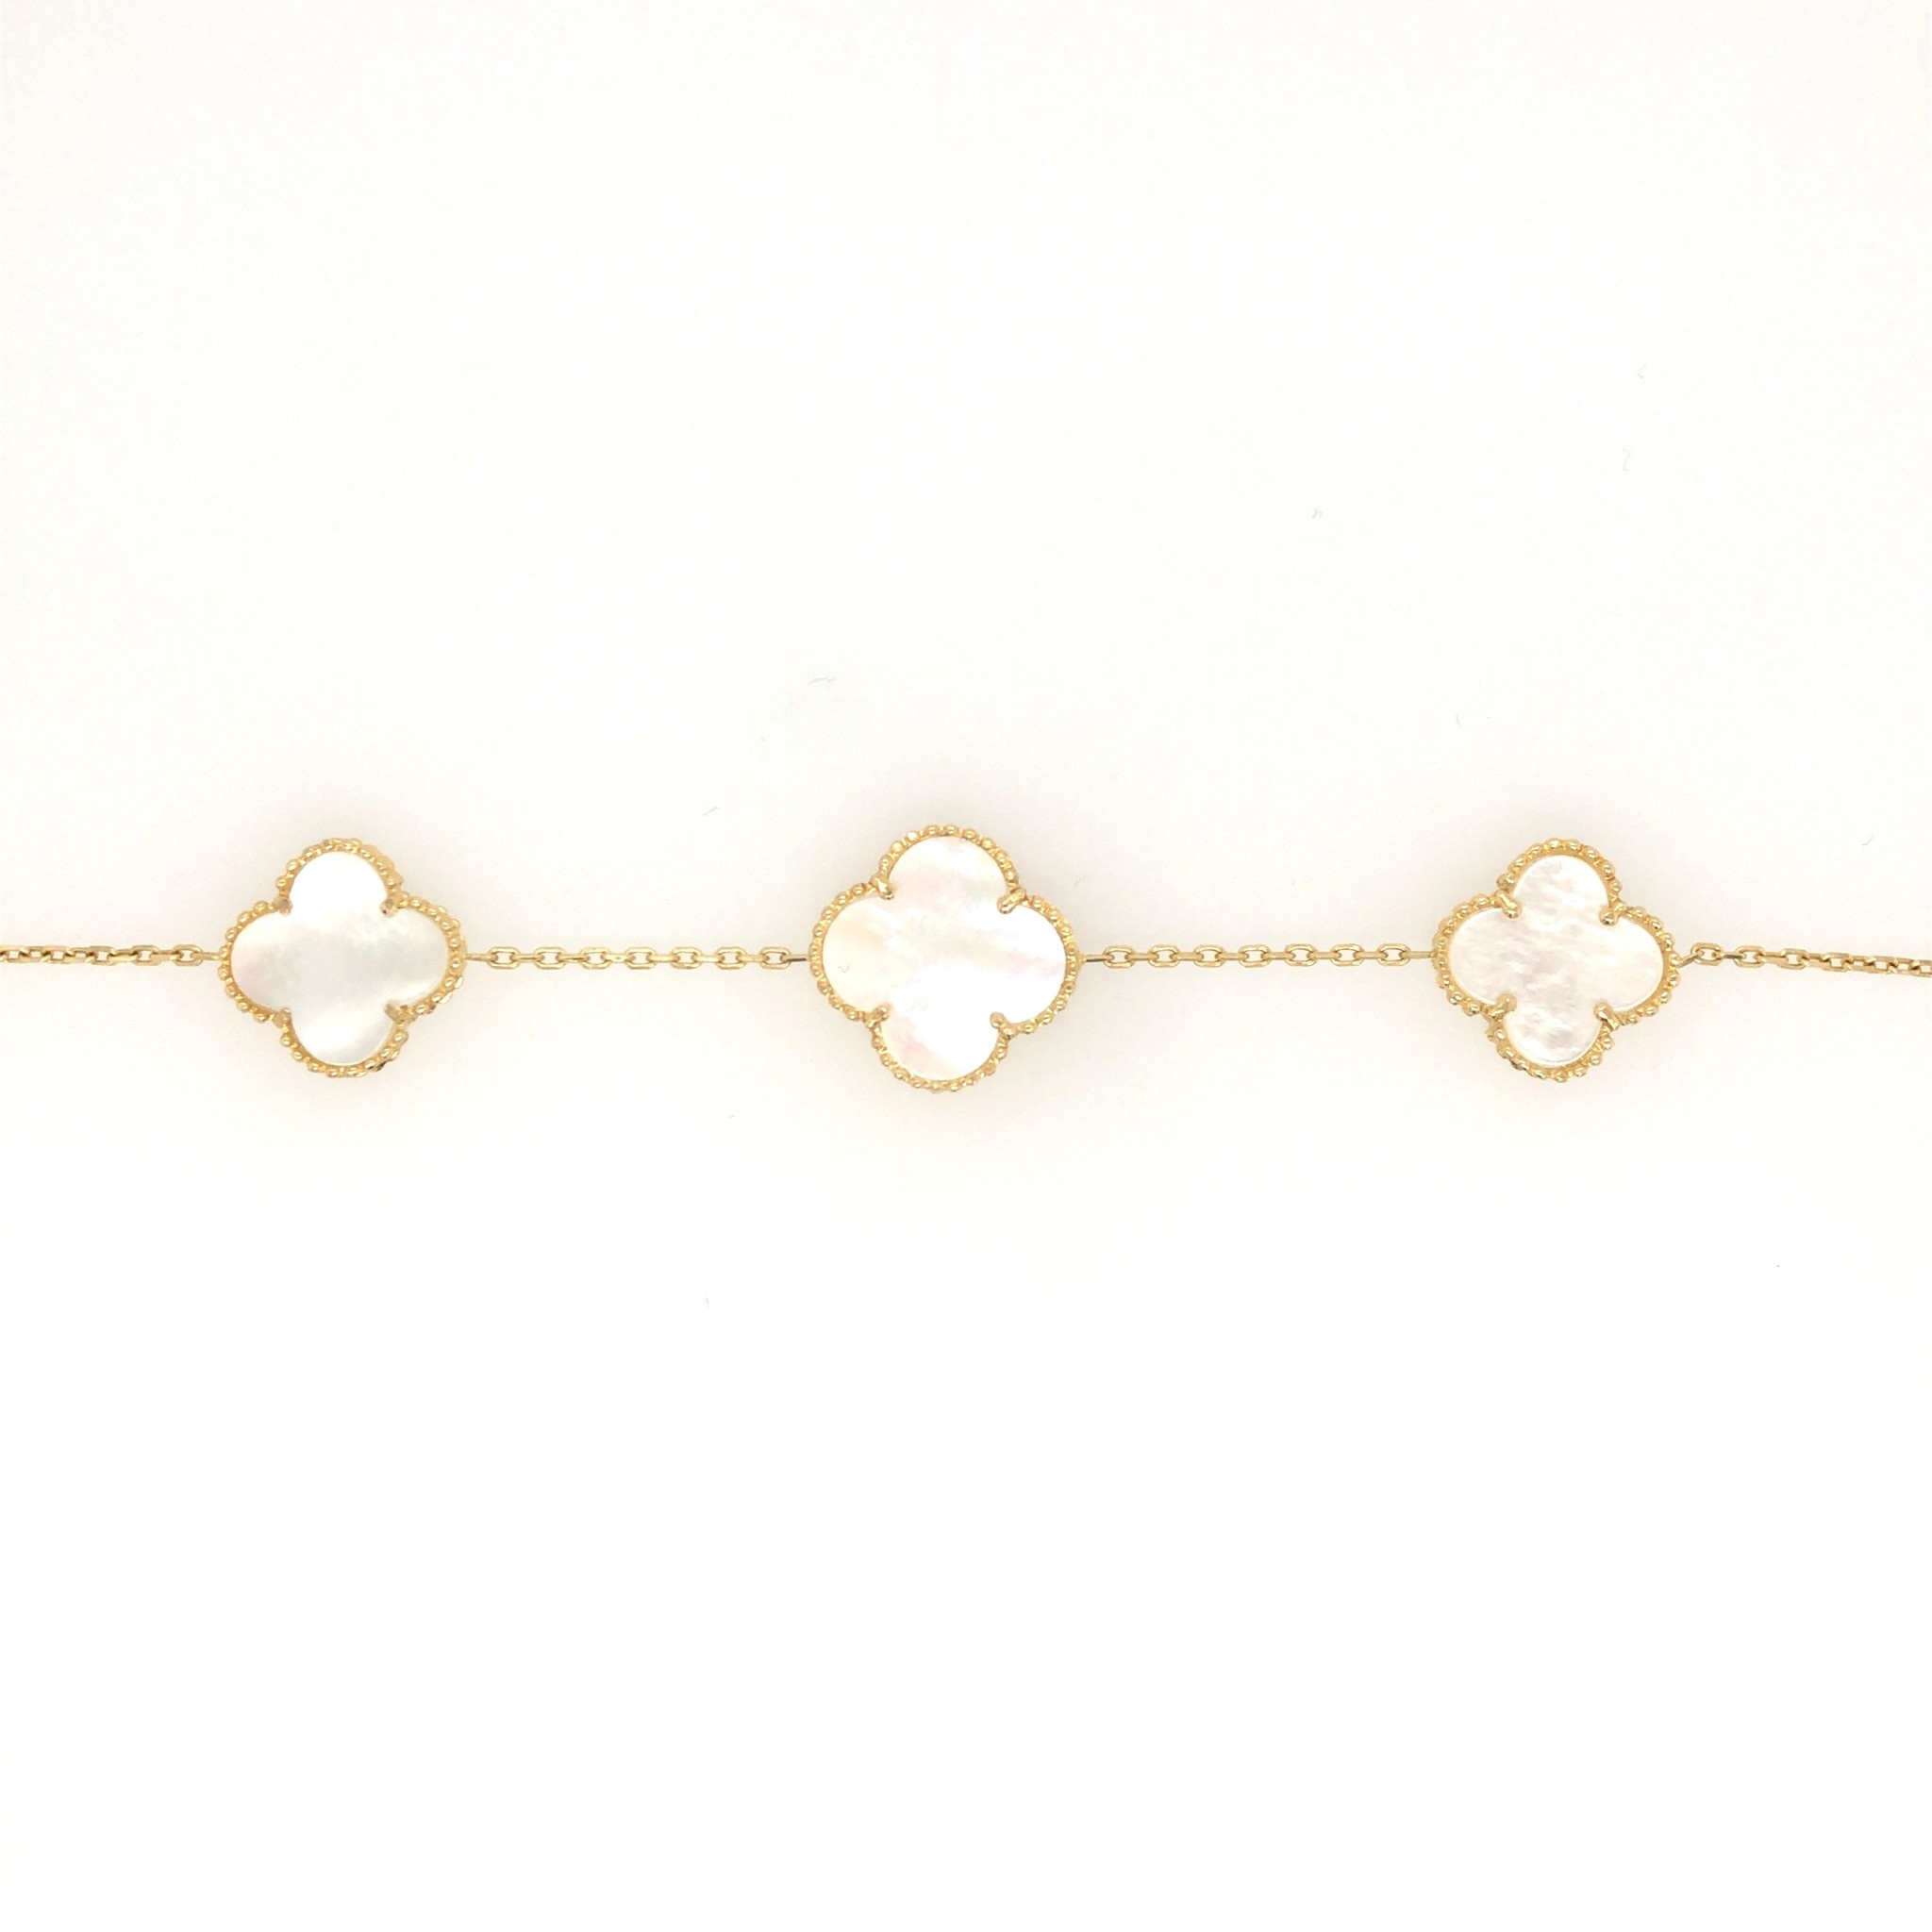 20109 14K YELLOW GOLD TRIPLE MOTHER OF PEARL CLOVER CHARMS CABLE LINK BRACELET